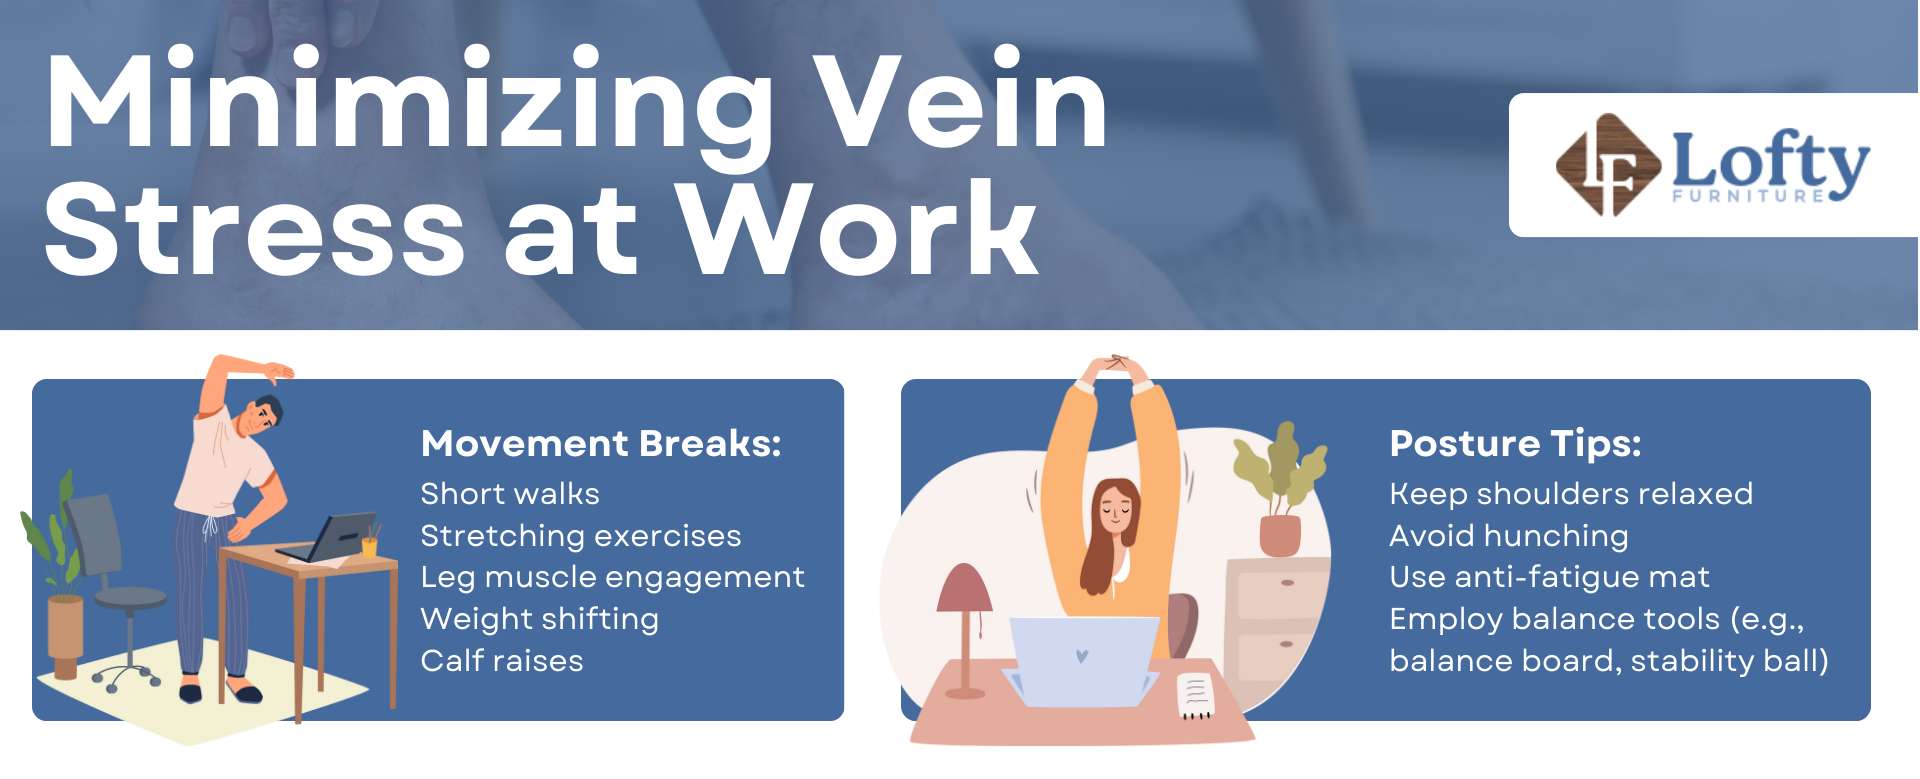 An illustration on how to minimize vein stress at work.